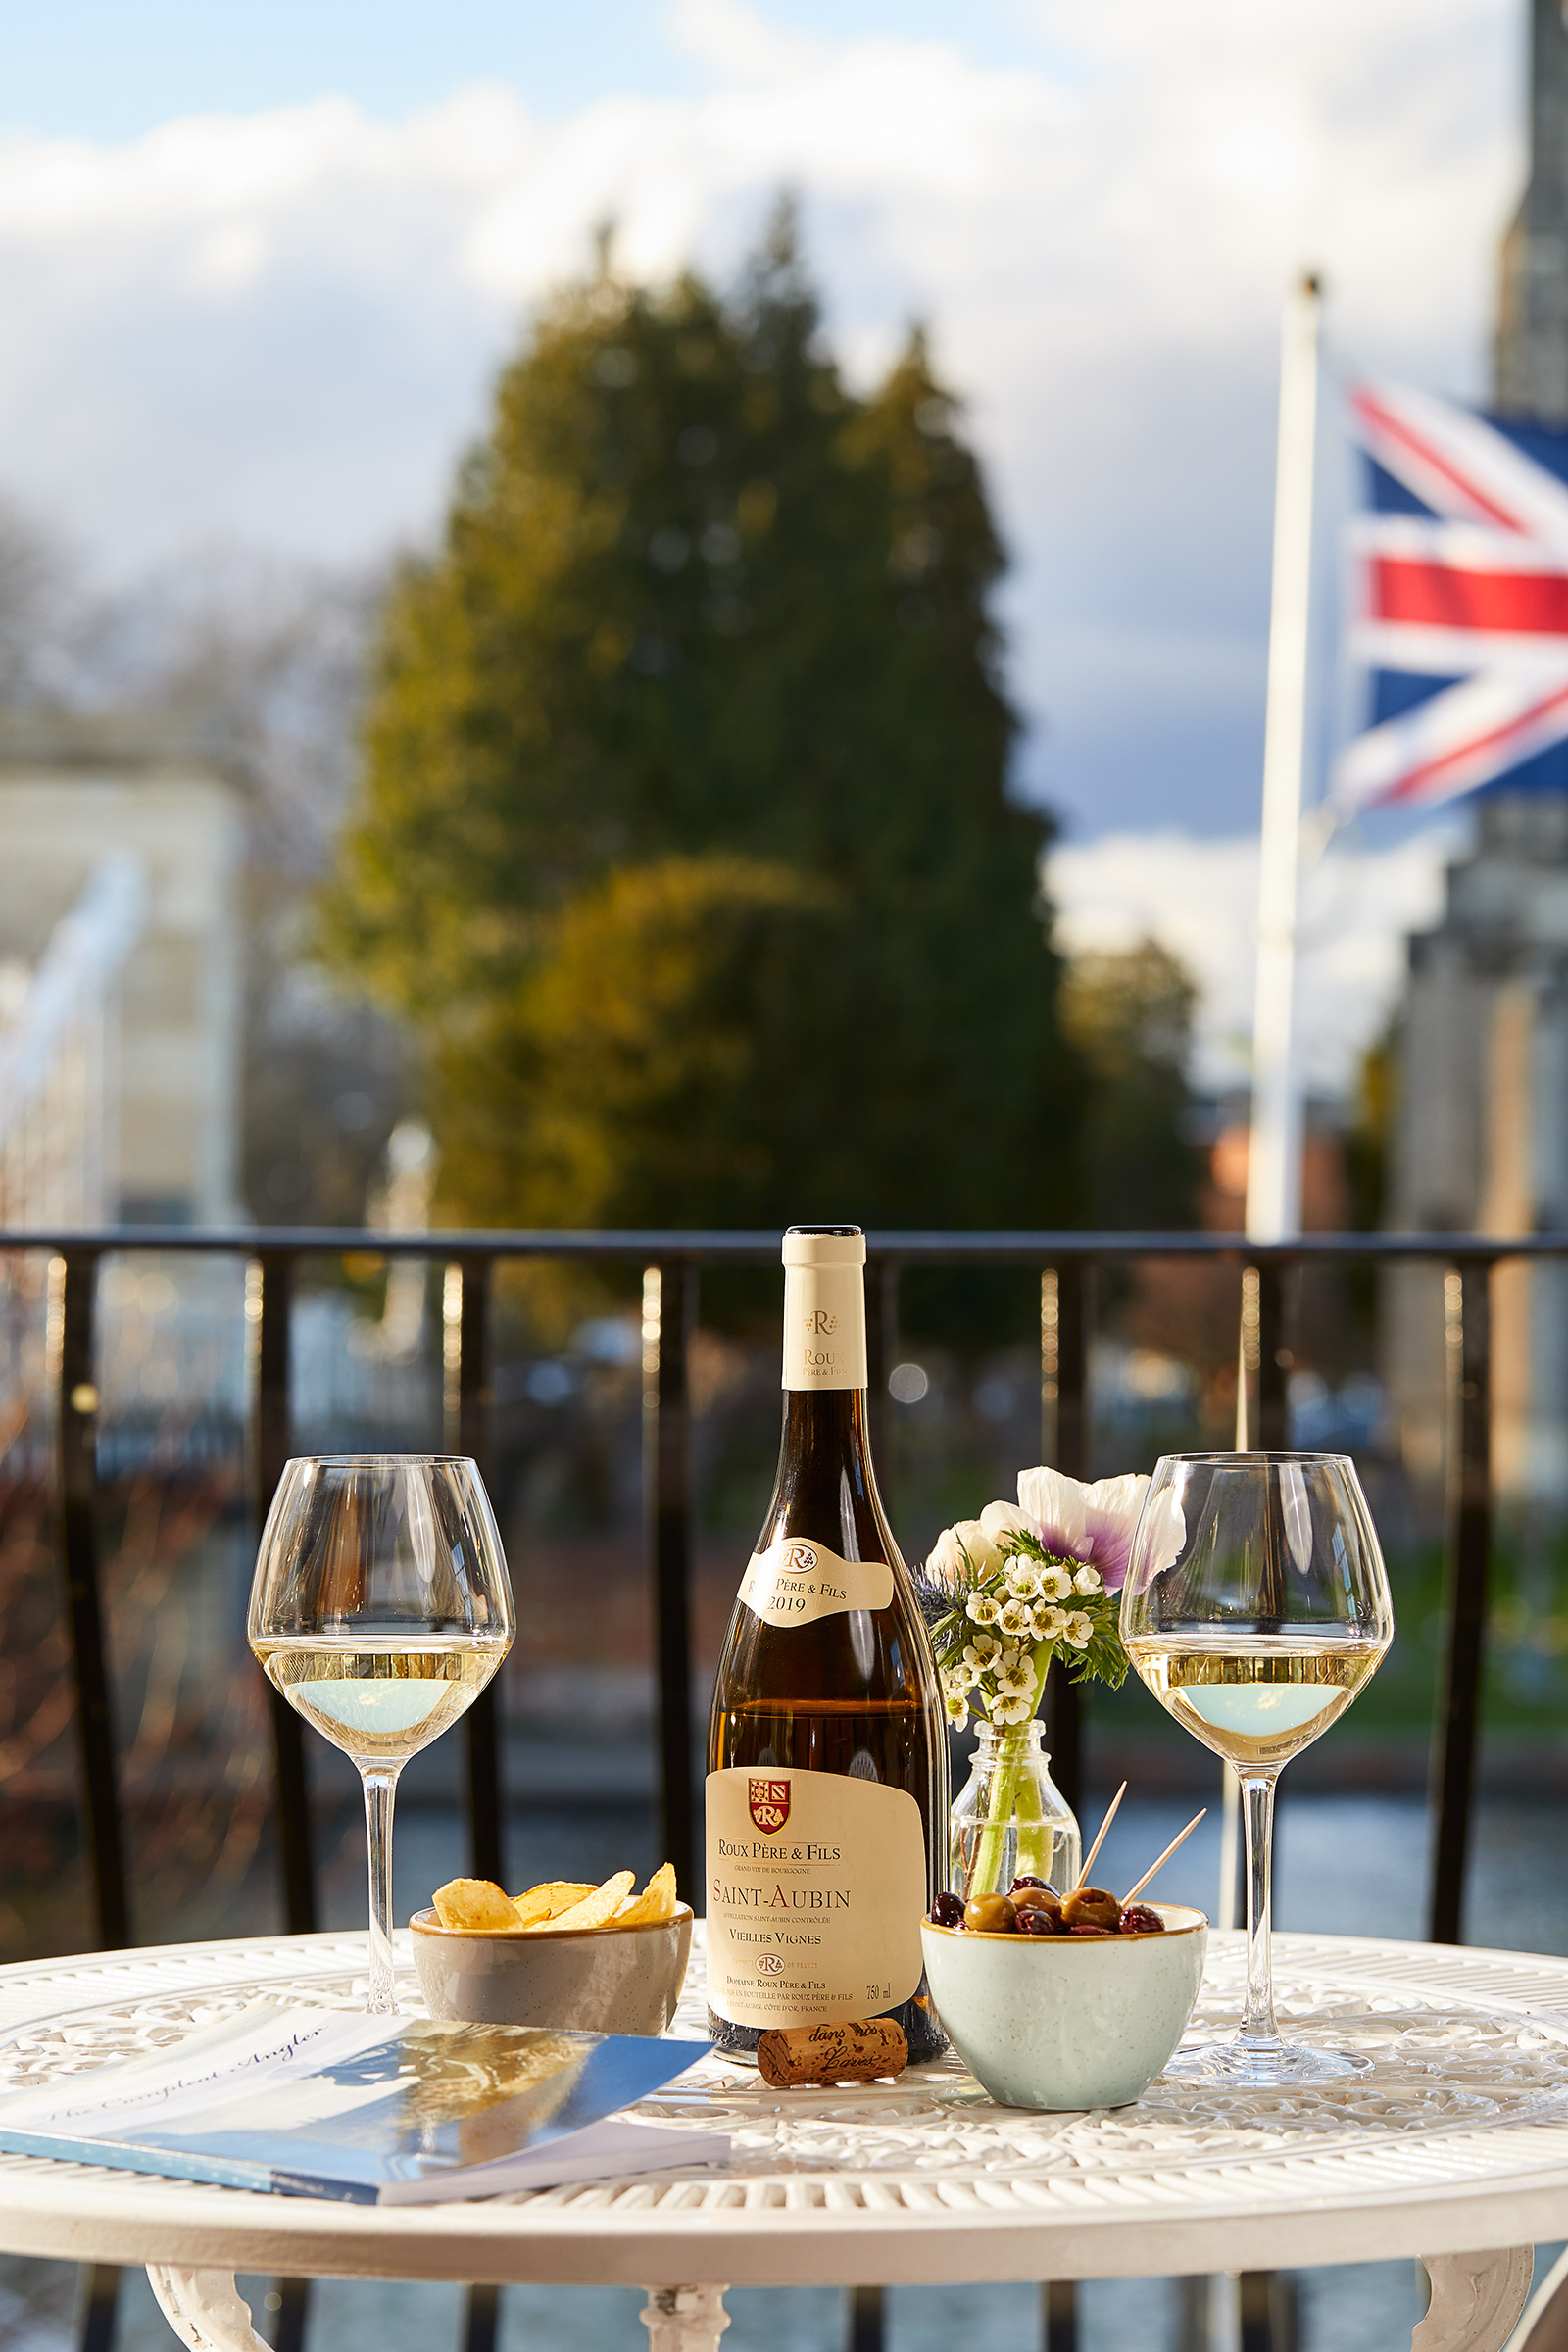 Saint Aubin wine and snacks, Compleat Angler, Marlow, food and drink photographer, travel and lifestyle photography